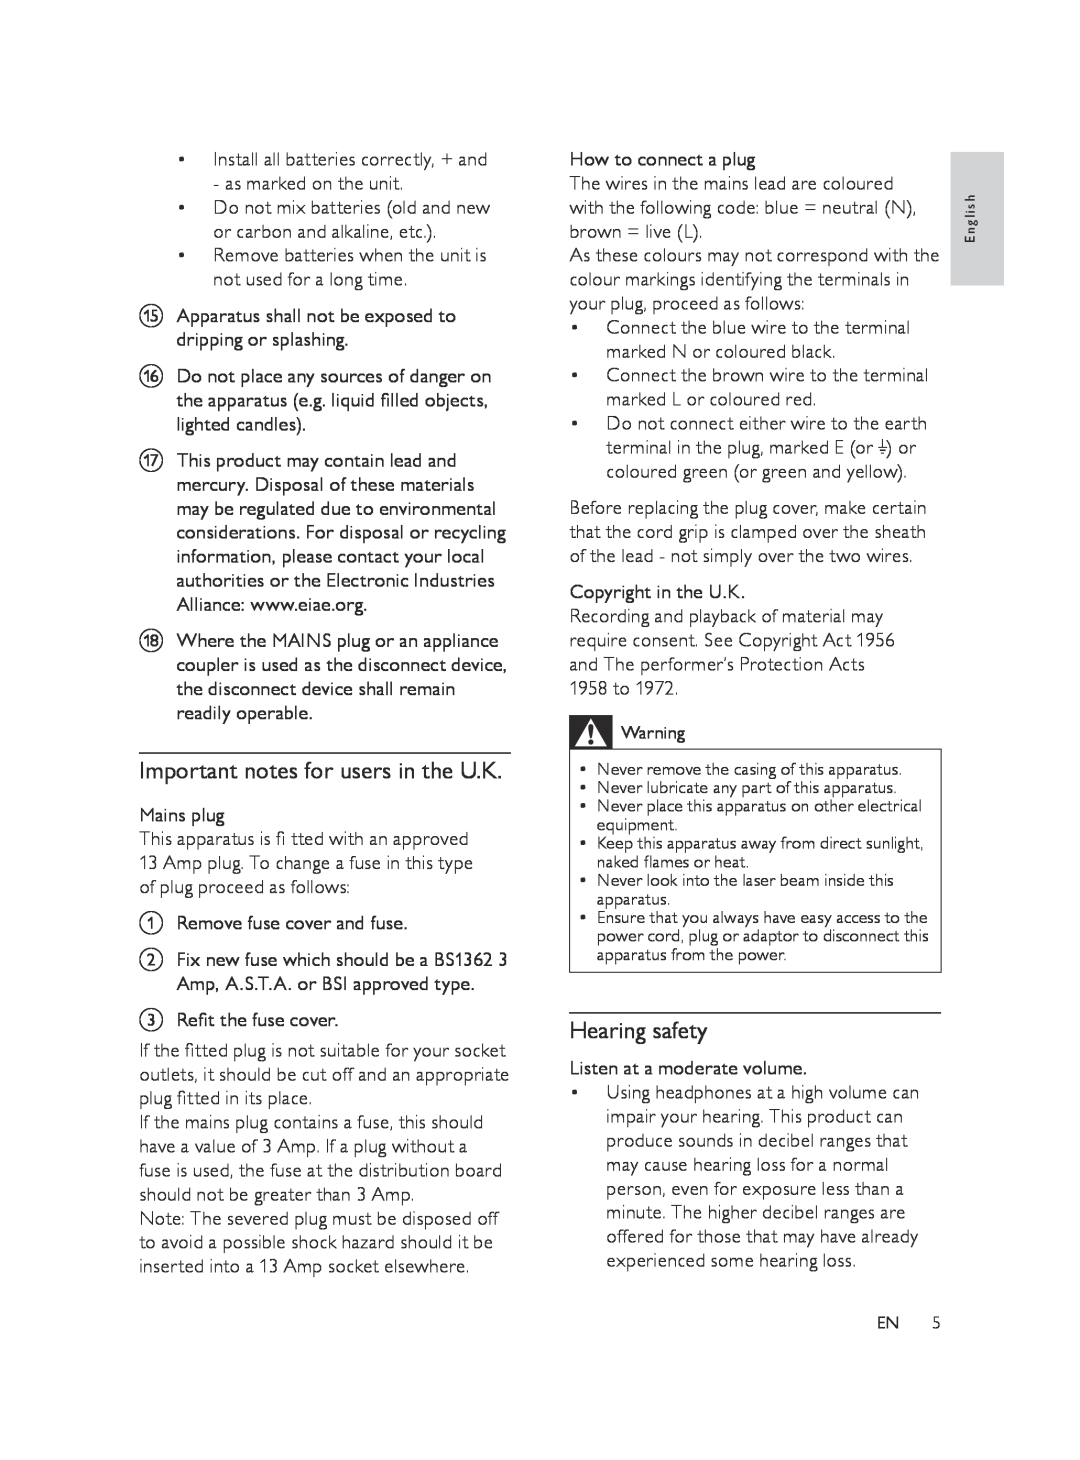 Philips FWM197/05 user manual Important notes for users in the U.K, Hearing safety 